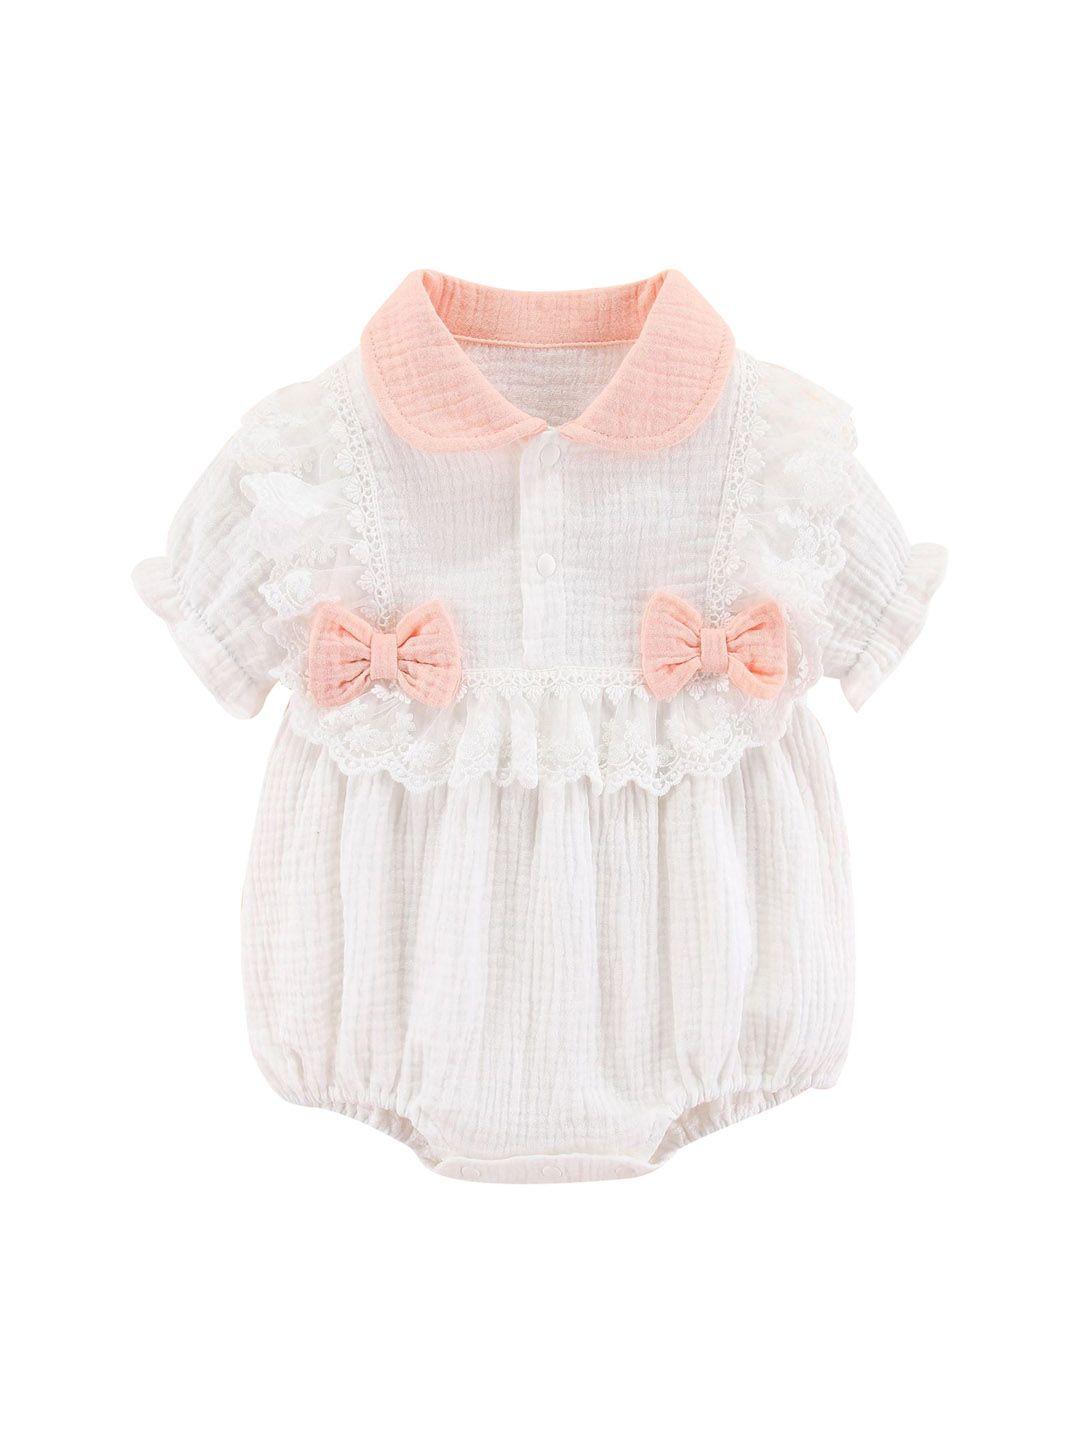 stylecast infant girls cotton rompers